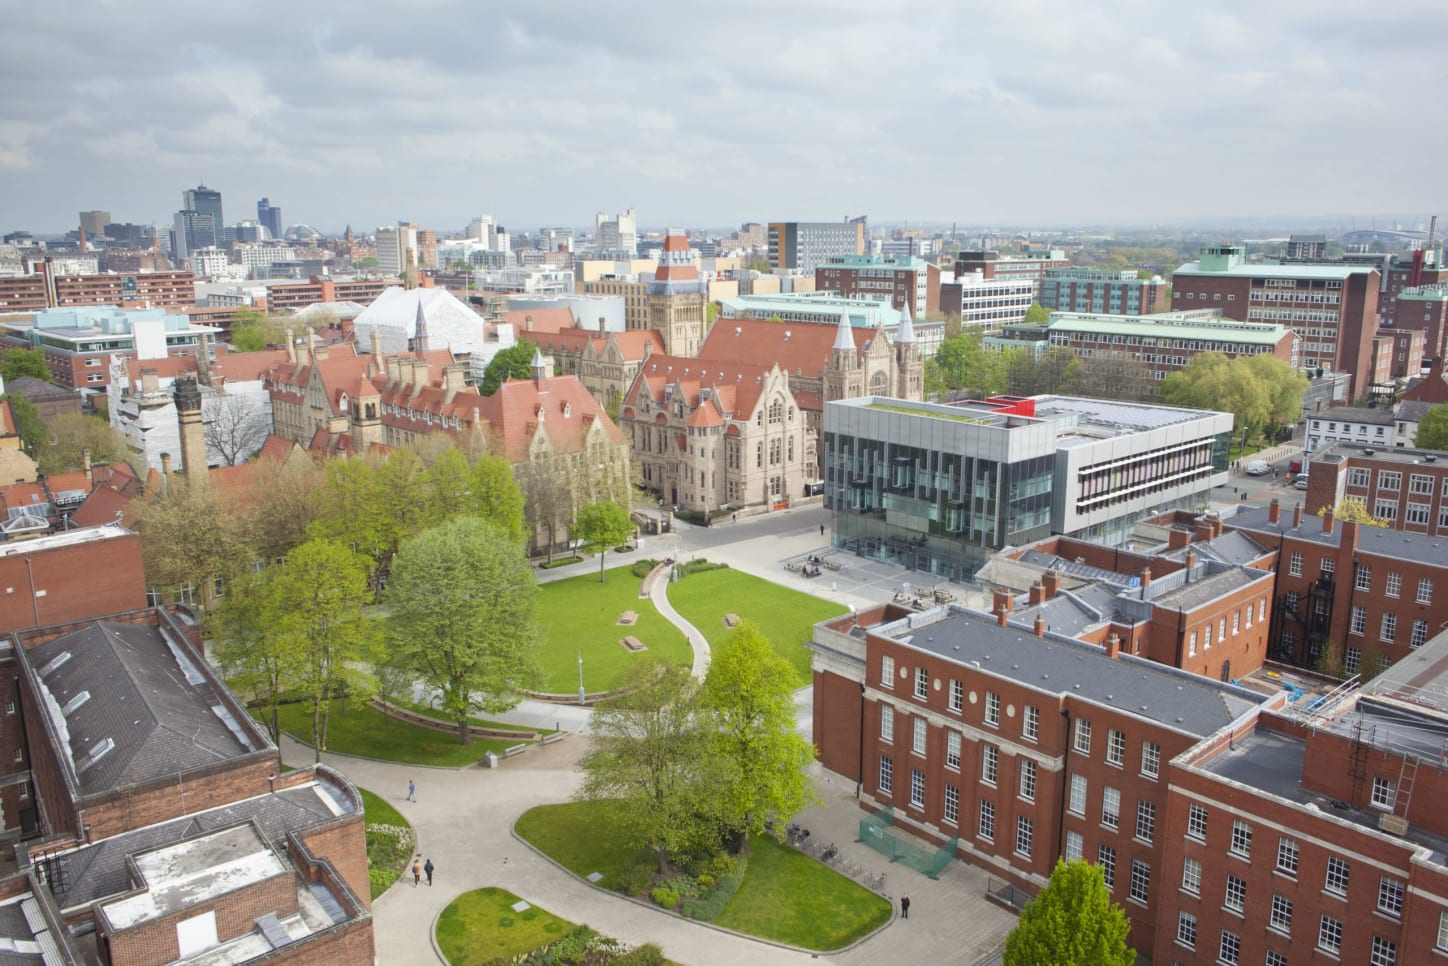 University of Manchester BA in English Literature with Creative Writing